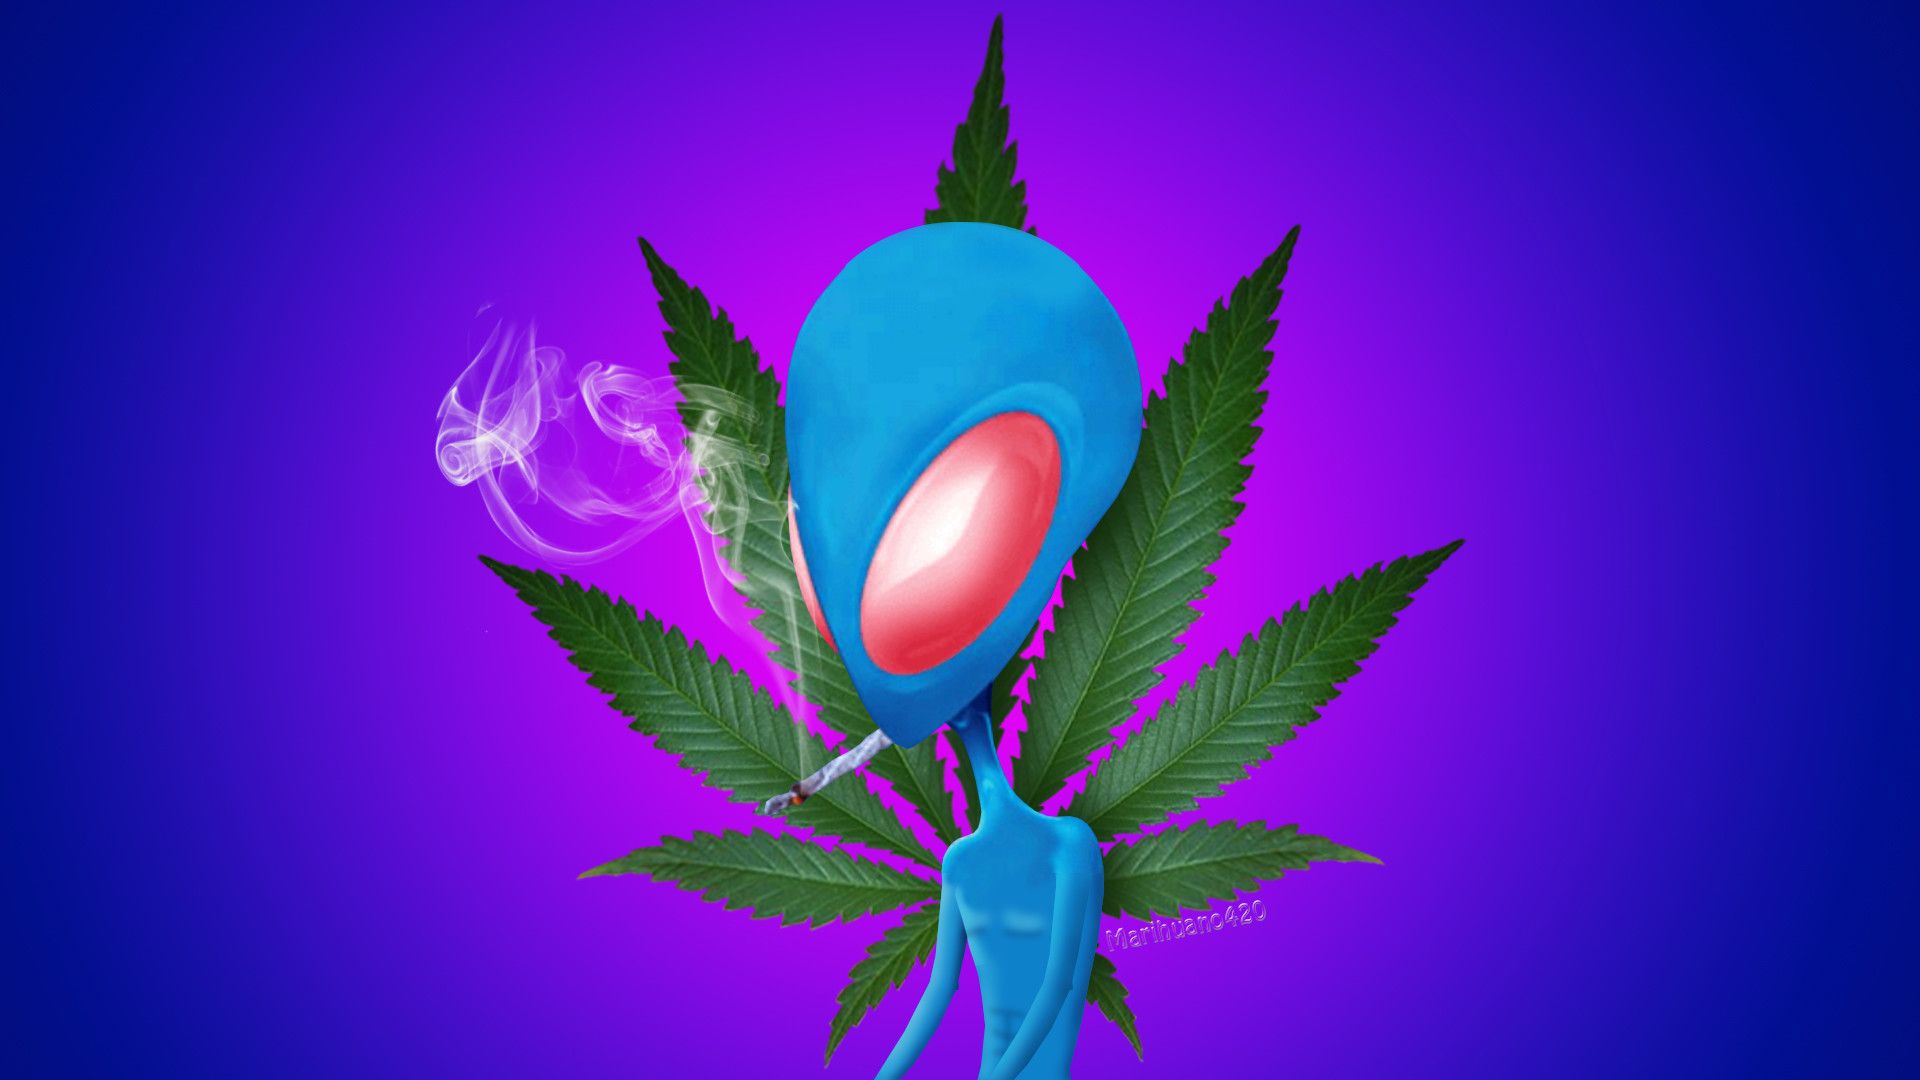 Cannabis with Purple Leaves Isolated on a Black Background Flowering  Marijuana with Vibrant Foliage and Bud Flower Stock Photo  Image of haze  medical 231930228